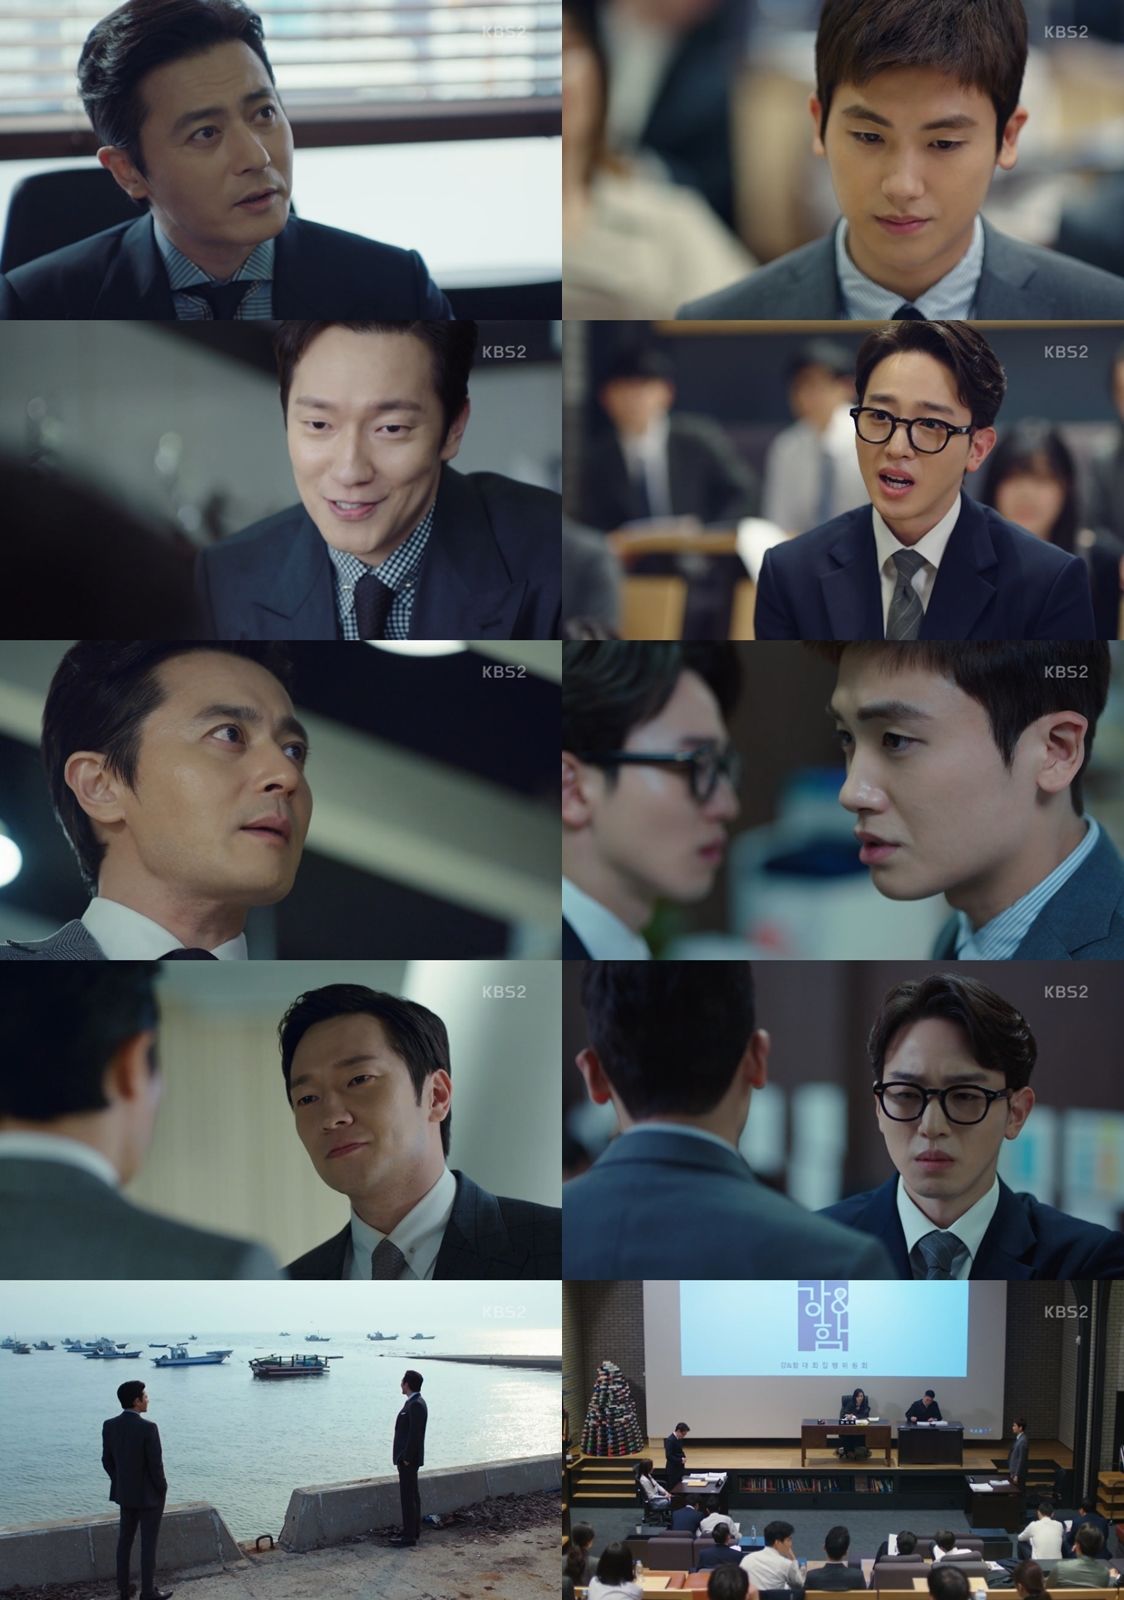 On the 9th broadcast, Suits, the story of Park Hyung-sik (Ko Yeon-woo) was unfolded on the test board of mock court, as well as helping Jang Dong-gun (Miniforce Seok) and Jang Dong-gun, who took charge of two cases of the station governor.First, Jang Dong-gun was to take on both cases of the station governor at the same time: one was to defend the defendants drug company in the Victims lawSuits against the drug company.Another is the plaintiff, Victims, who was in the class action Suits of Victims against the chemical company backwards.One is to hit the rock with the egg, and the other is to hit the egg as a rock.In this process, Jang Dong-gun revealed his instincts: Son Seok-gu (David Kim), who suddenly provoked Jang Dong-gun by bringing up a mock court story during Harvard law school.Son Seok-gu was a lawyer for a chemical company and pushed Jang Dong-gun by using a mean number.Jaguar Jang Dong-gun, who always plays the game of winning, had to make a decision to hunt a cowardly numbered hand-to-hand like hyena; to bait rotten meat.Park Hyung-sik was also a Jaguar facing hyena; Park Hyung-sik is being jealous of everyones attention, just by the fact that he is the Asso of Jang Dong-gun.In the meantime, a mock court was held, which can be said to be a great opportunity for new lawyers.As always, Choi Gwi-hwa (Chae Geun-sik) wanted to trap Park Hyung-sik, Jang Dong-guns assistant, and set him up against Itaewoong (Westside), who won several times in a mock court.Park Hyung-sik tried to reach an agreement with the west before going to a mock court as Jang Dong-guns tip was: Itaoong also appeared to respond to the agreement.But when the mock court began, itaoong changed his attitude, and Park Hyung-sik, who had not written the agreement, was just embarrassed.In addition, Ko Sung-hee (Kim Ji-na) made a small misunderstanding to Park Hyung-sik and took on the role of a client of itaewoong.Park Hyung-sik must hunt the west side of the hyena.The Miniforce and Ko Yeon-woo have won a thrilling victory with perfect combination play so far.Most of them were good enough to win without going to trial, and they were good at fighting.The drama became more chewy and exciting as the actors performances such as Jang Dong-gun, Park Hyung-sik, and Son Seok-gu of a different presence were added to the details of the change of the characters.I am looking forward to seeing how this story will burst in the next round.